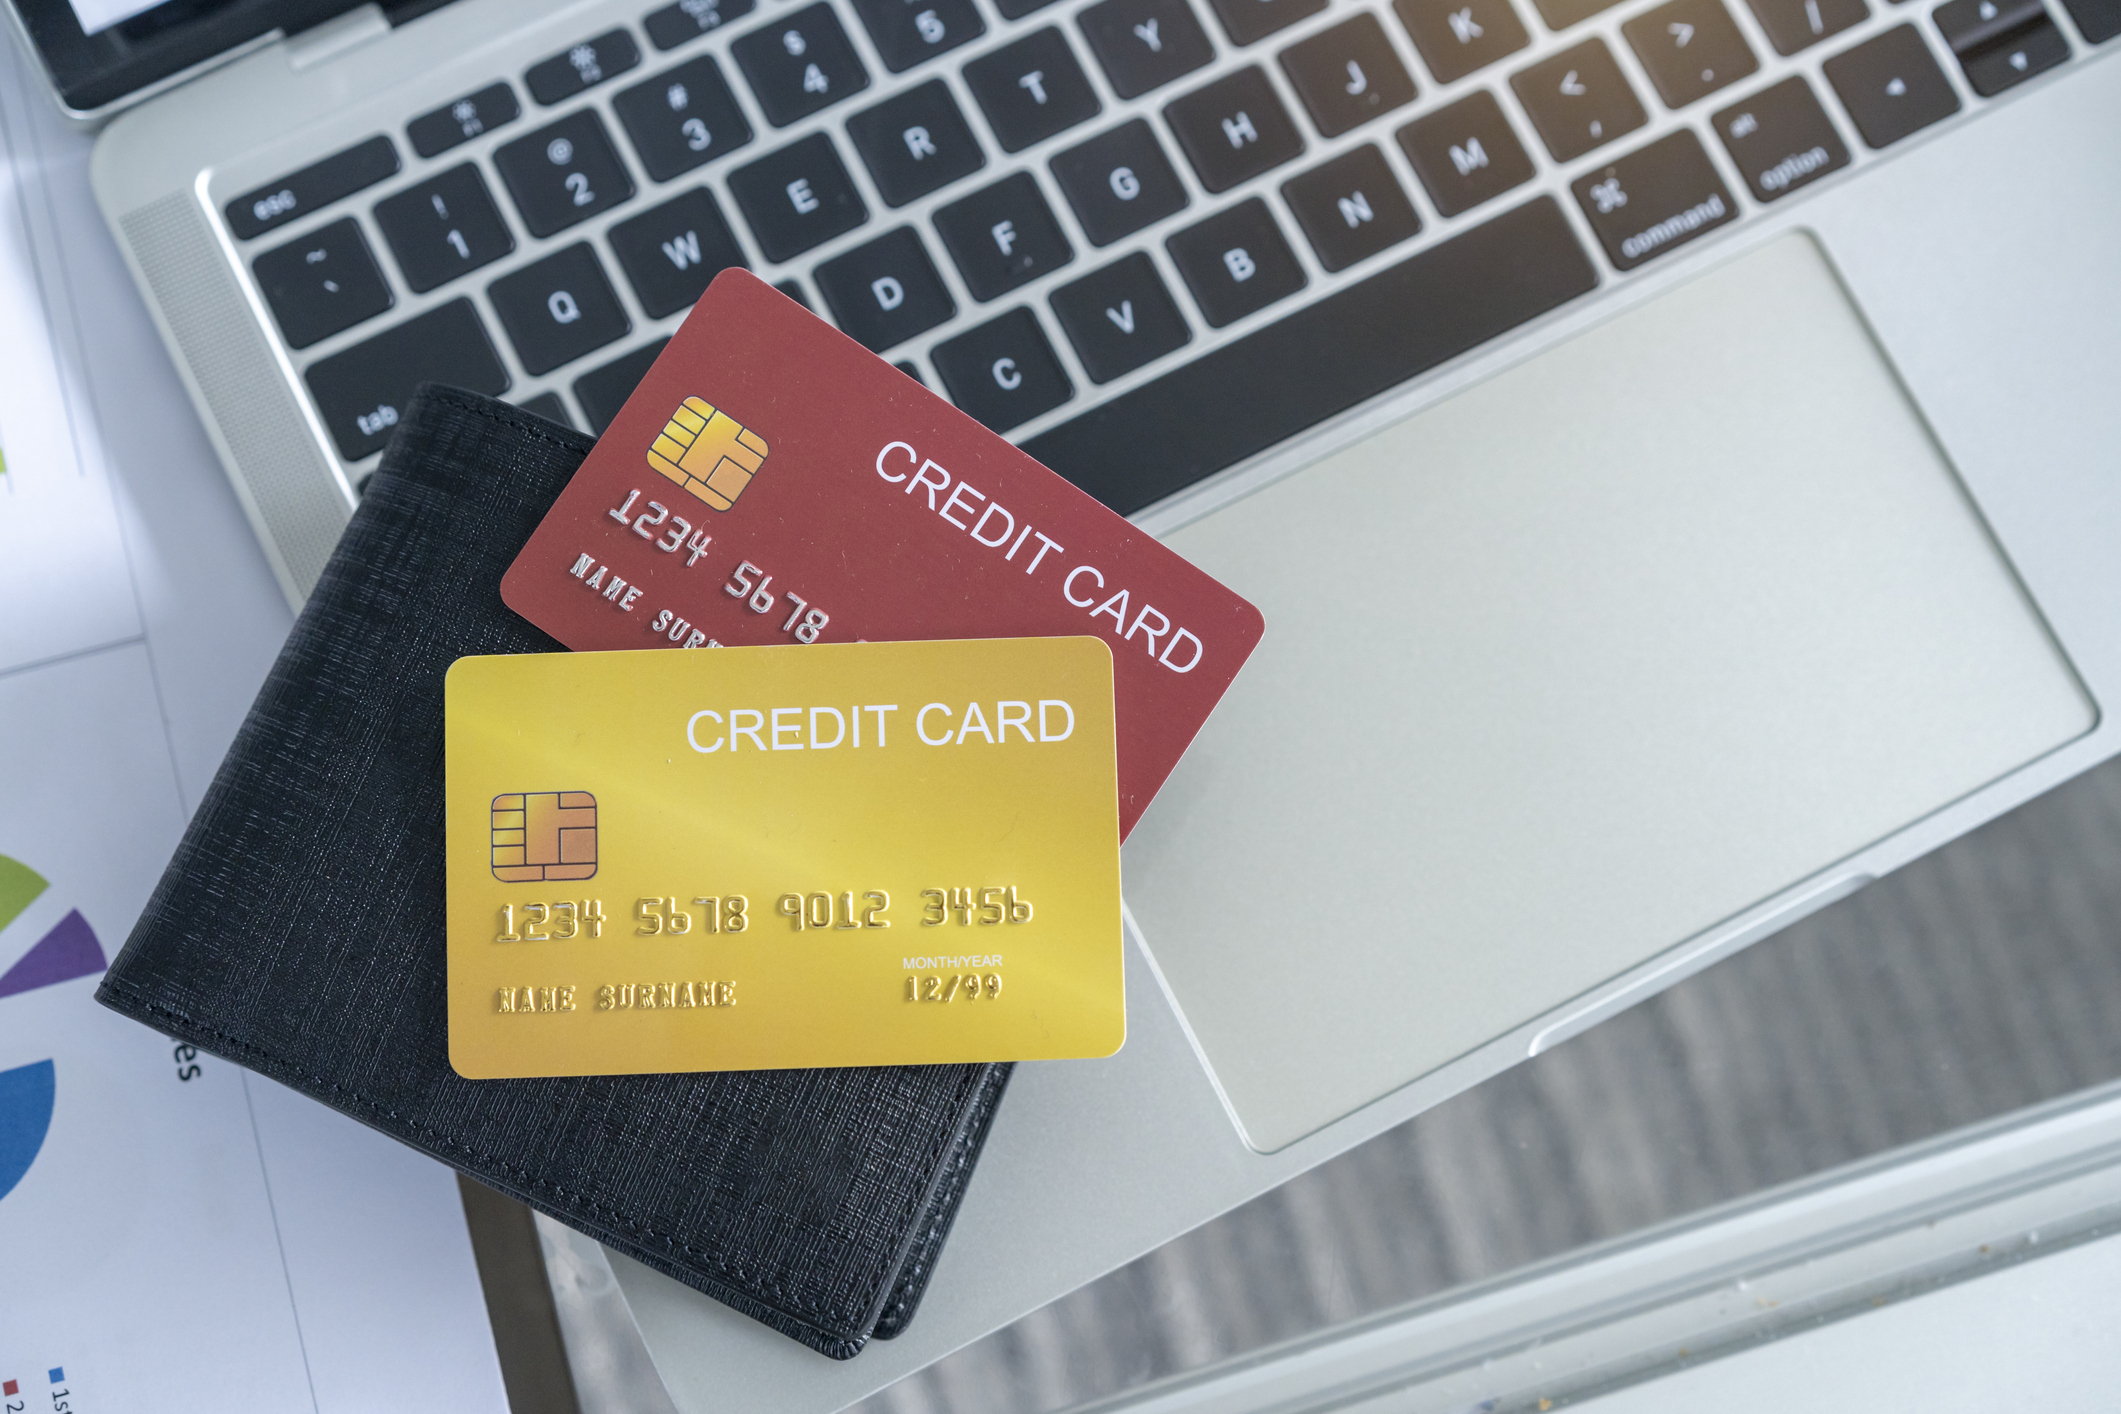 Two credit cards, one red and one yellow, partially inserted in a black wallet, placed on a laptop keyboard